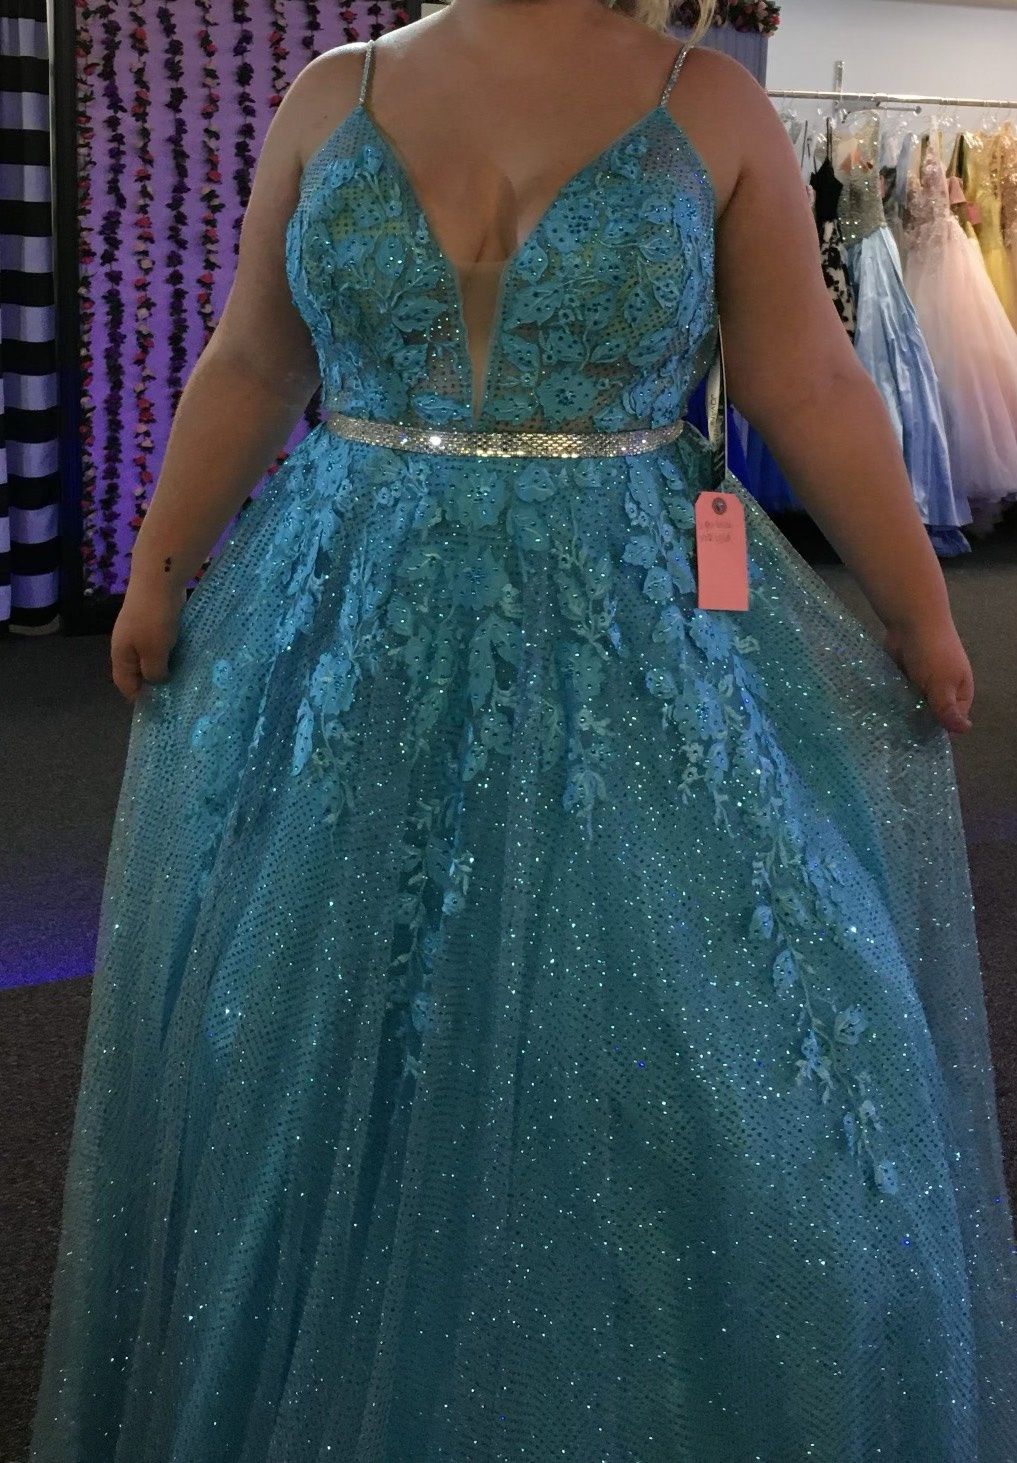 Size 12 Prom Blue Ball Gown on Queenly